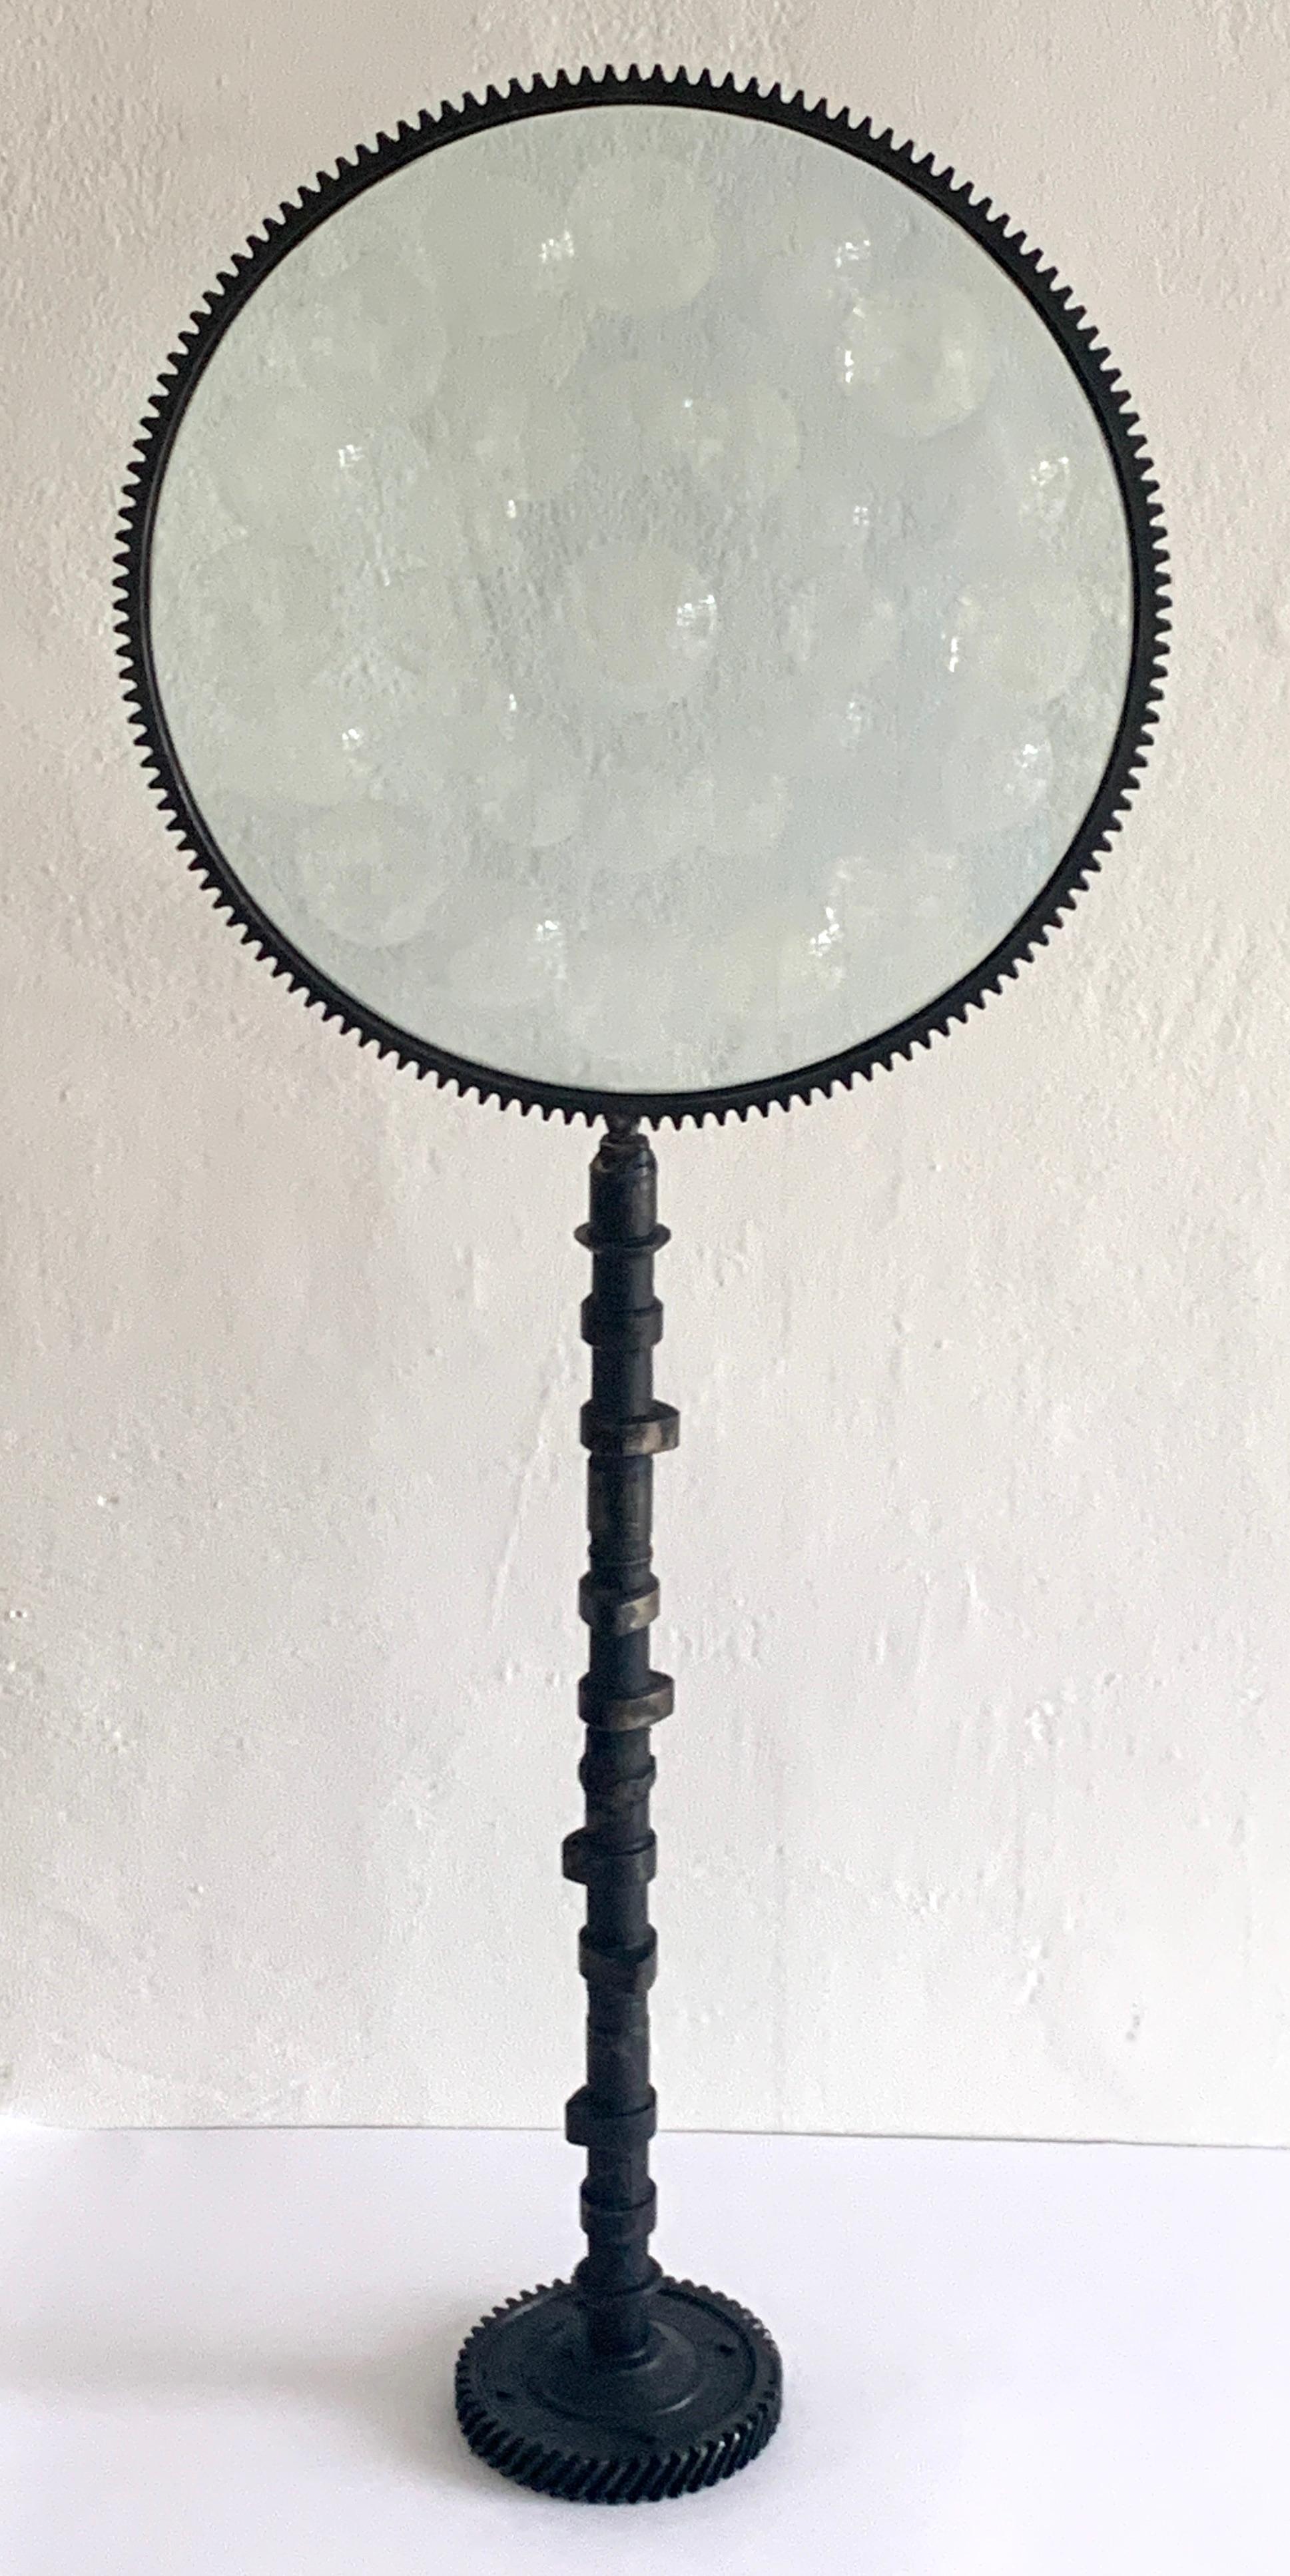 Engraved Magiscope Glass and Iron Sculpture, by Feliciano Béjar, 1981